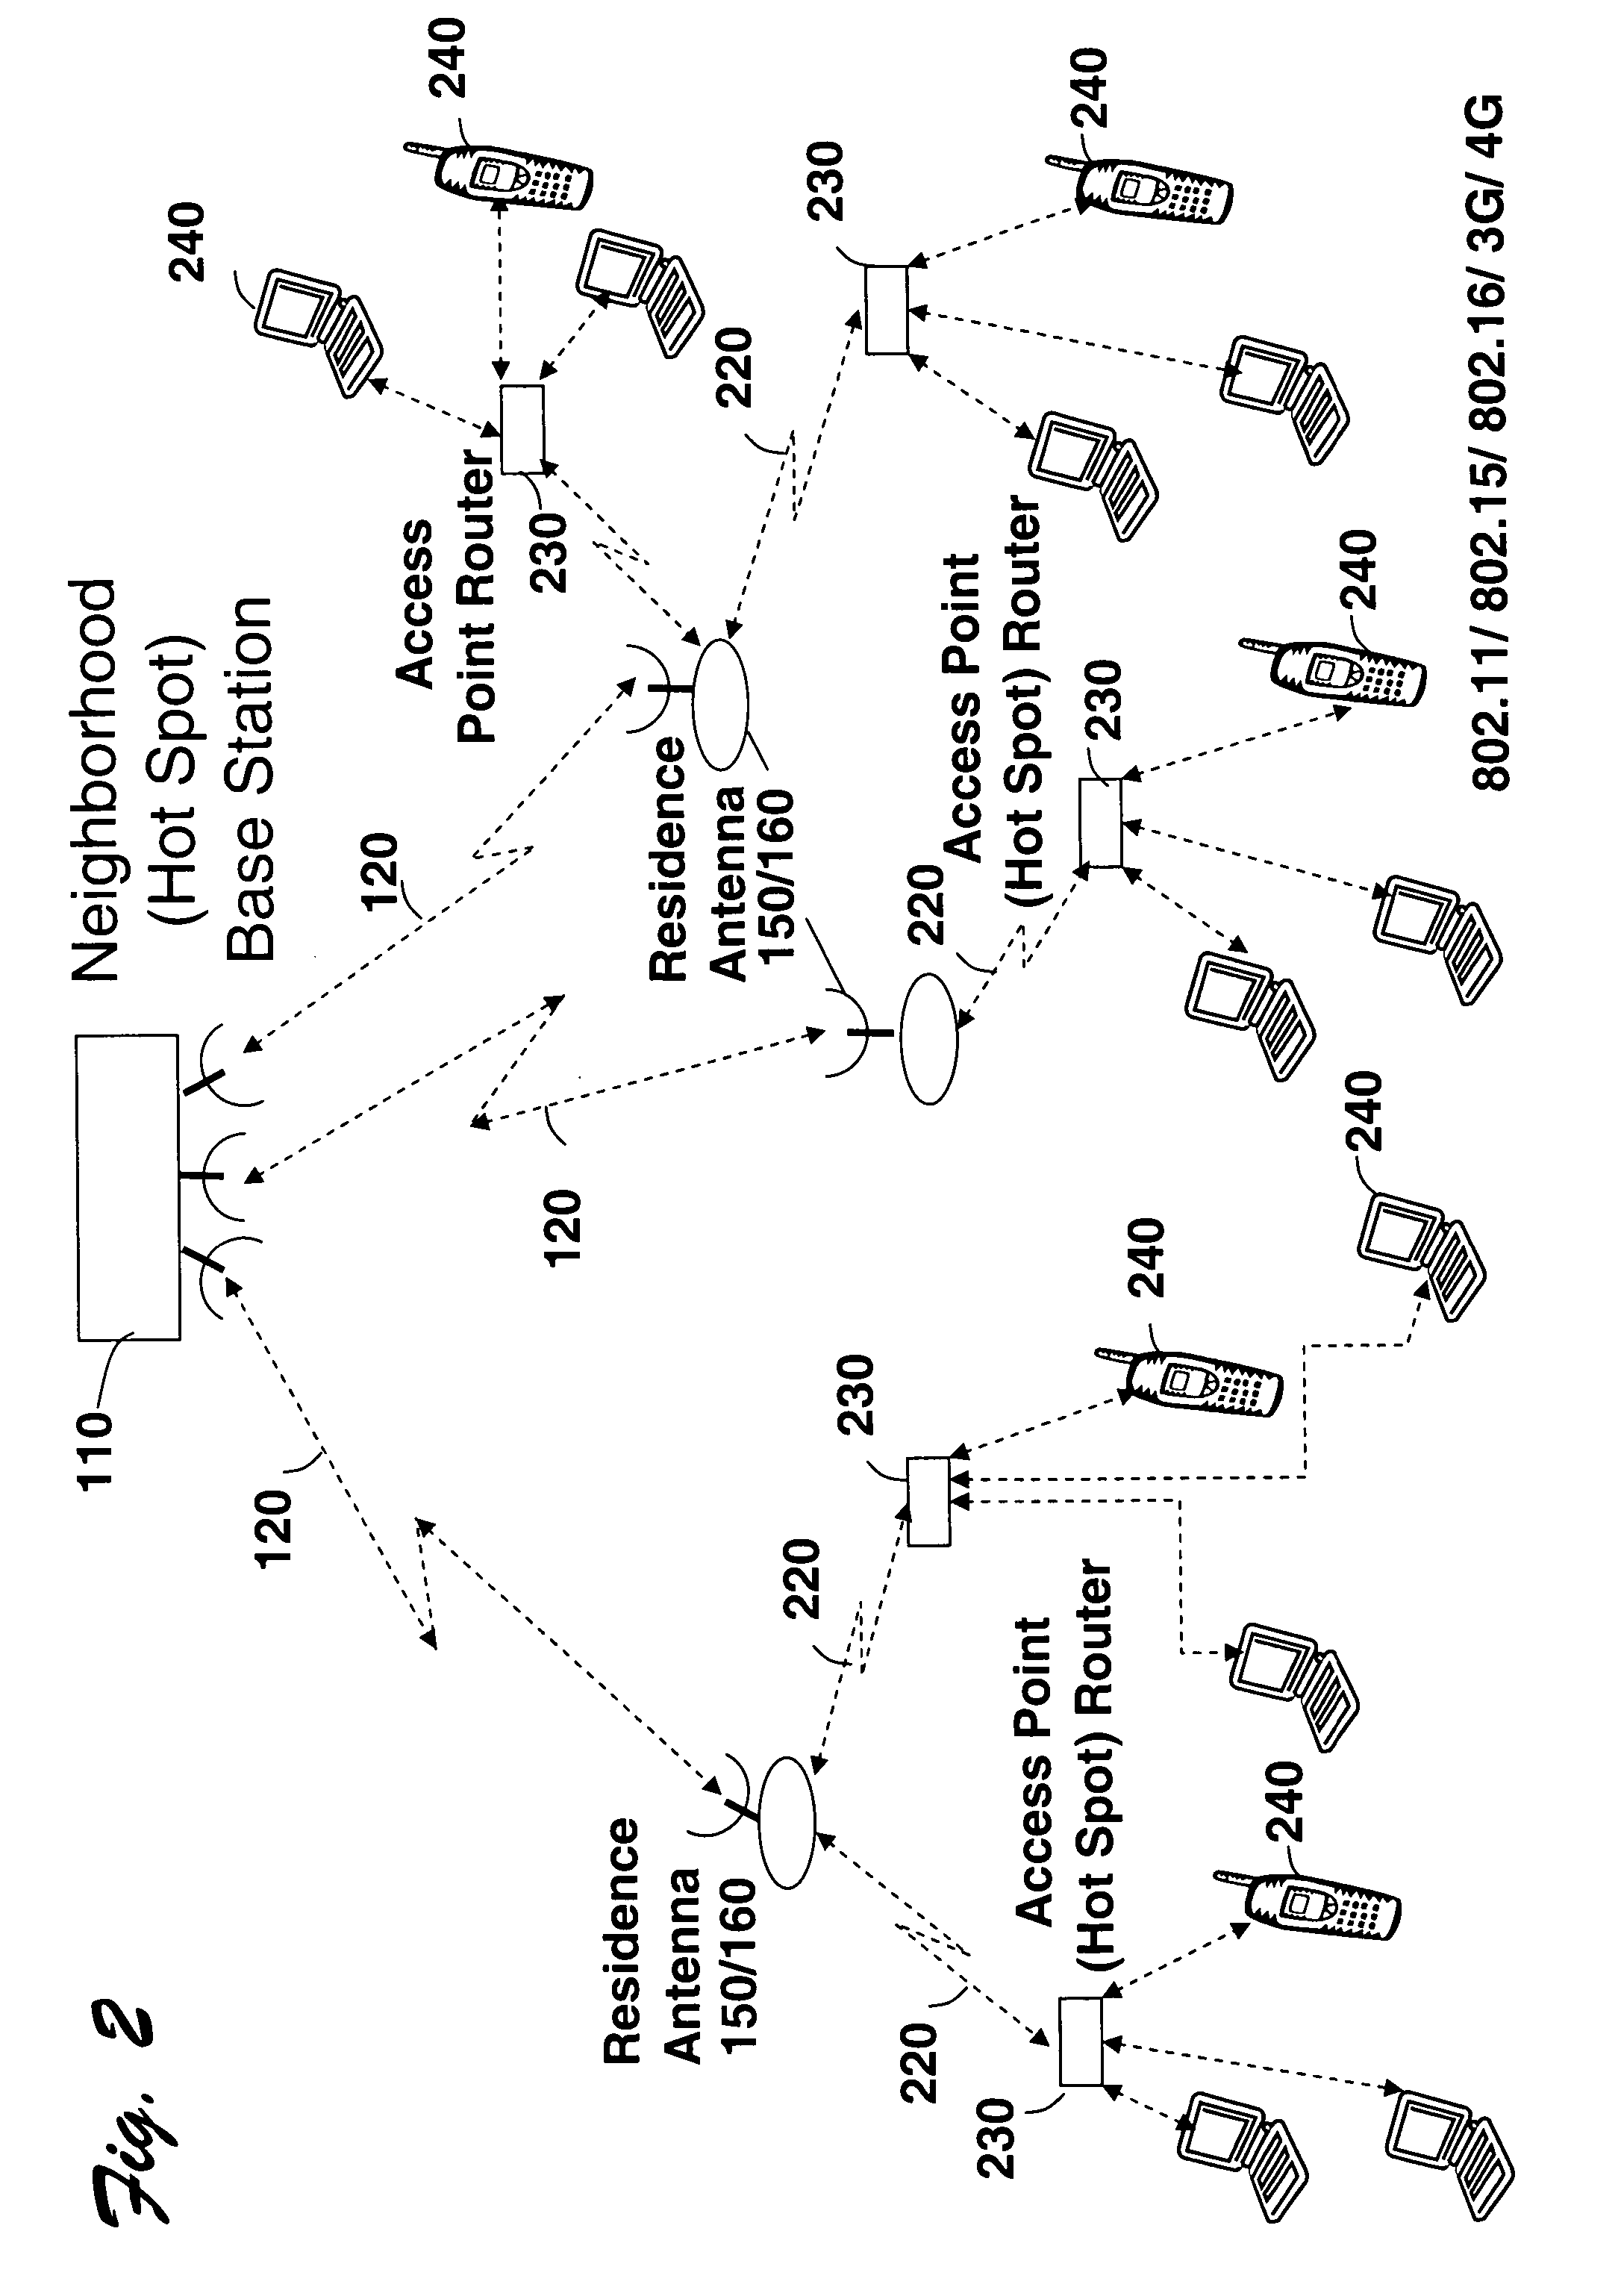 Directional antenna sectoring system and methodology